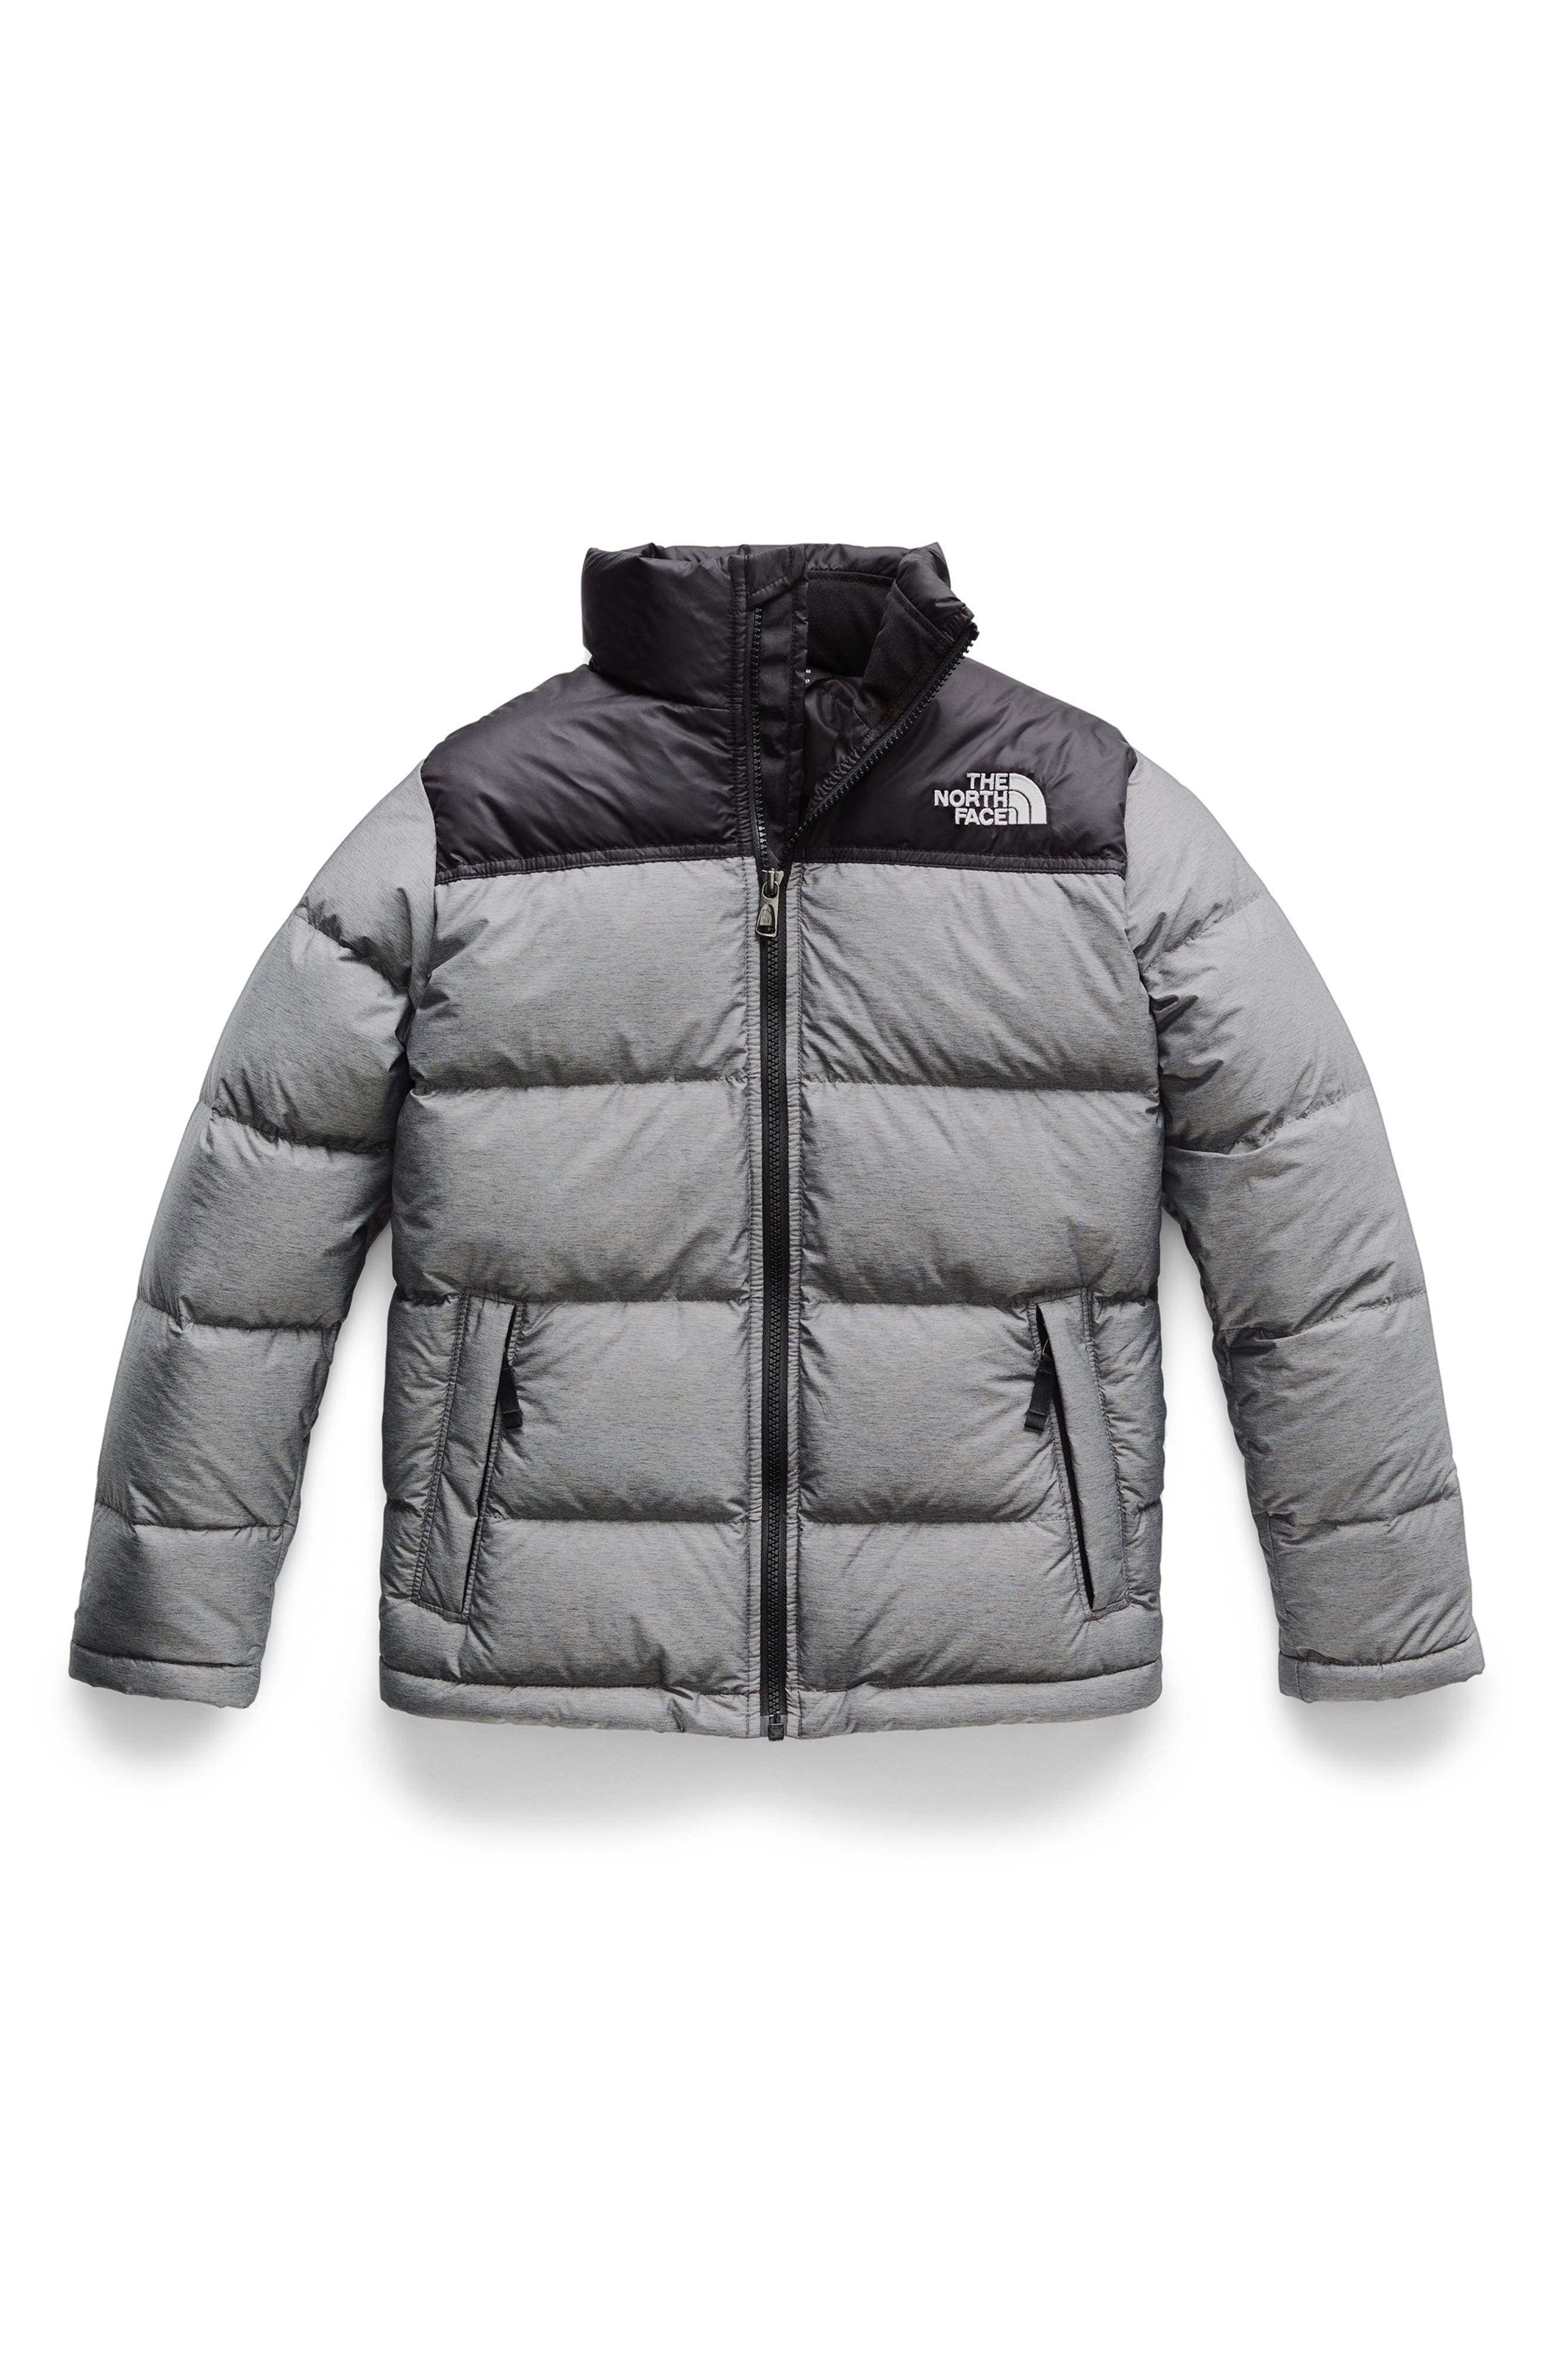 north face 700 down